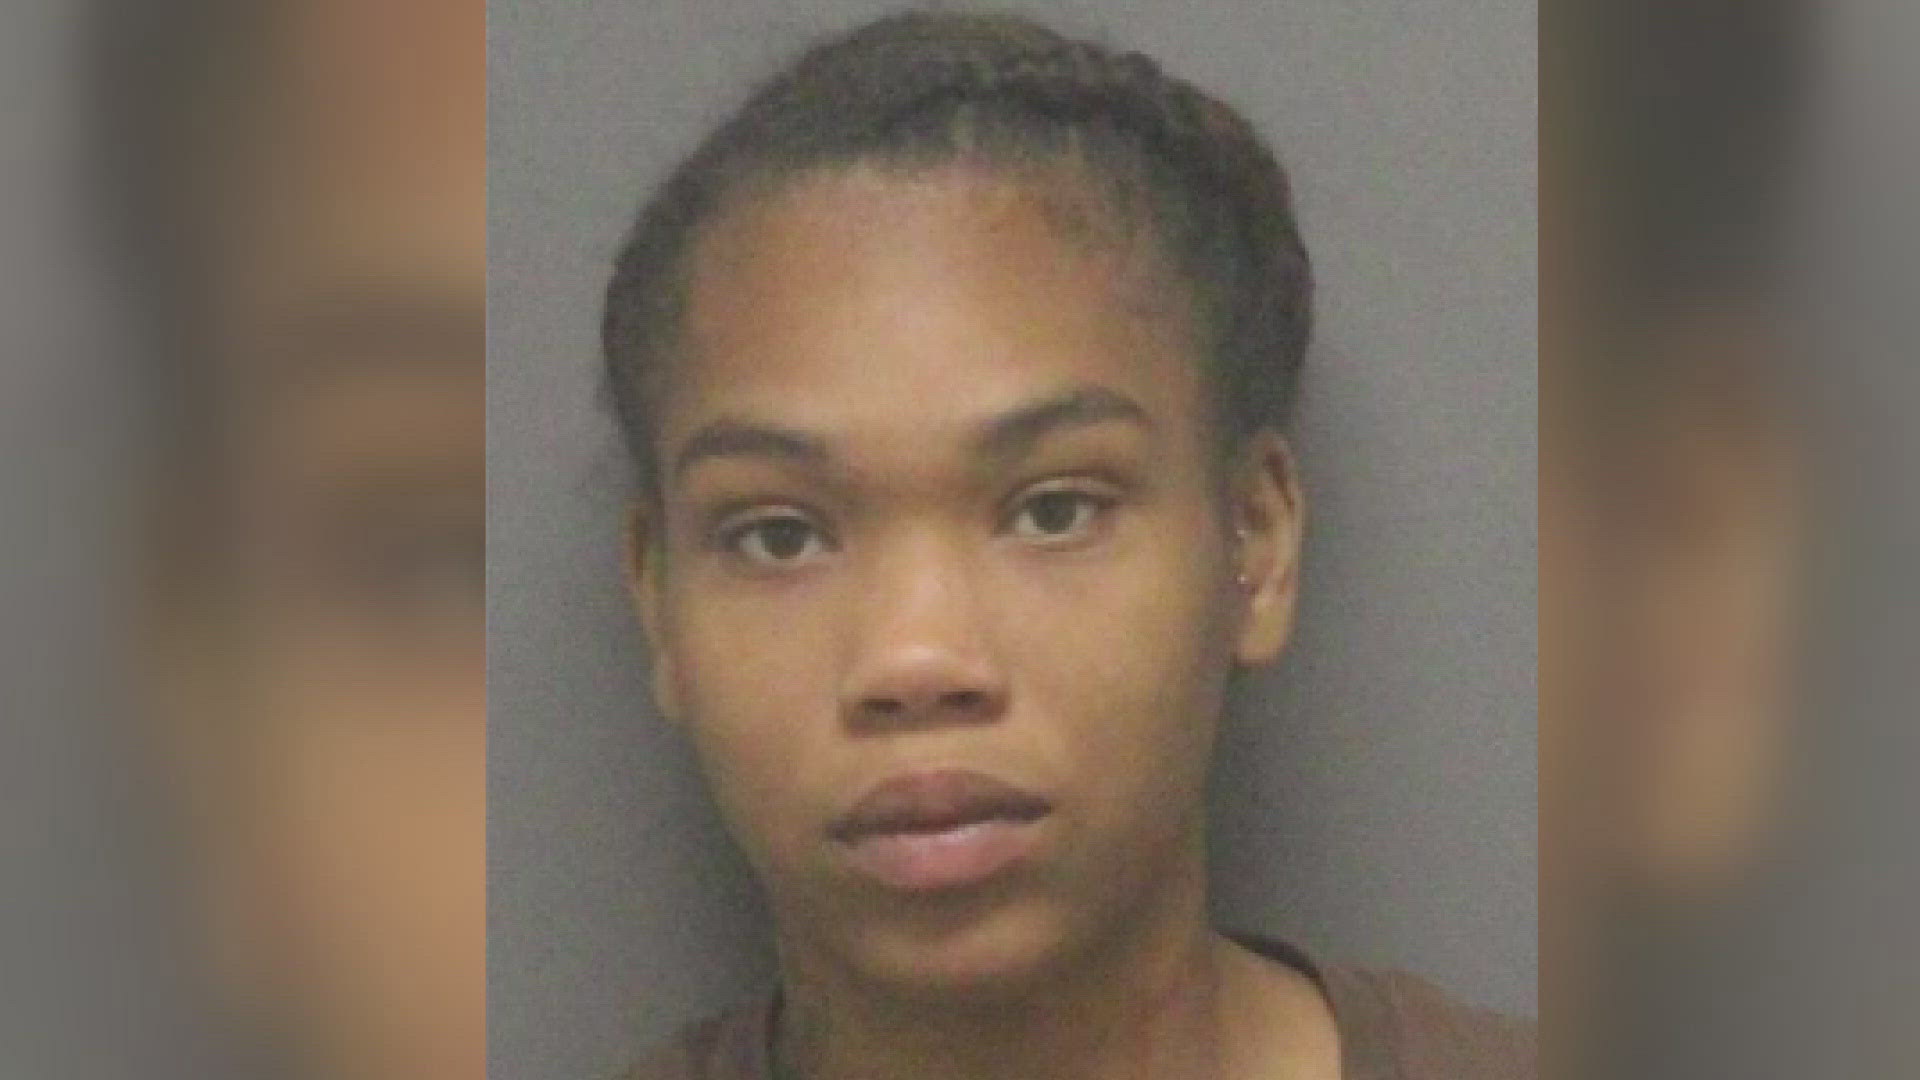 Zamyria Nicole Maness faces dozens of charges, including 15 counts of felony hit-and-run in Greensboro.